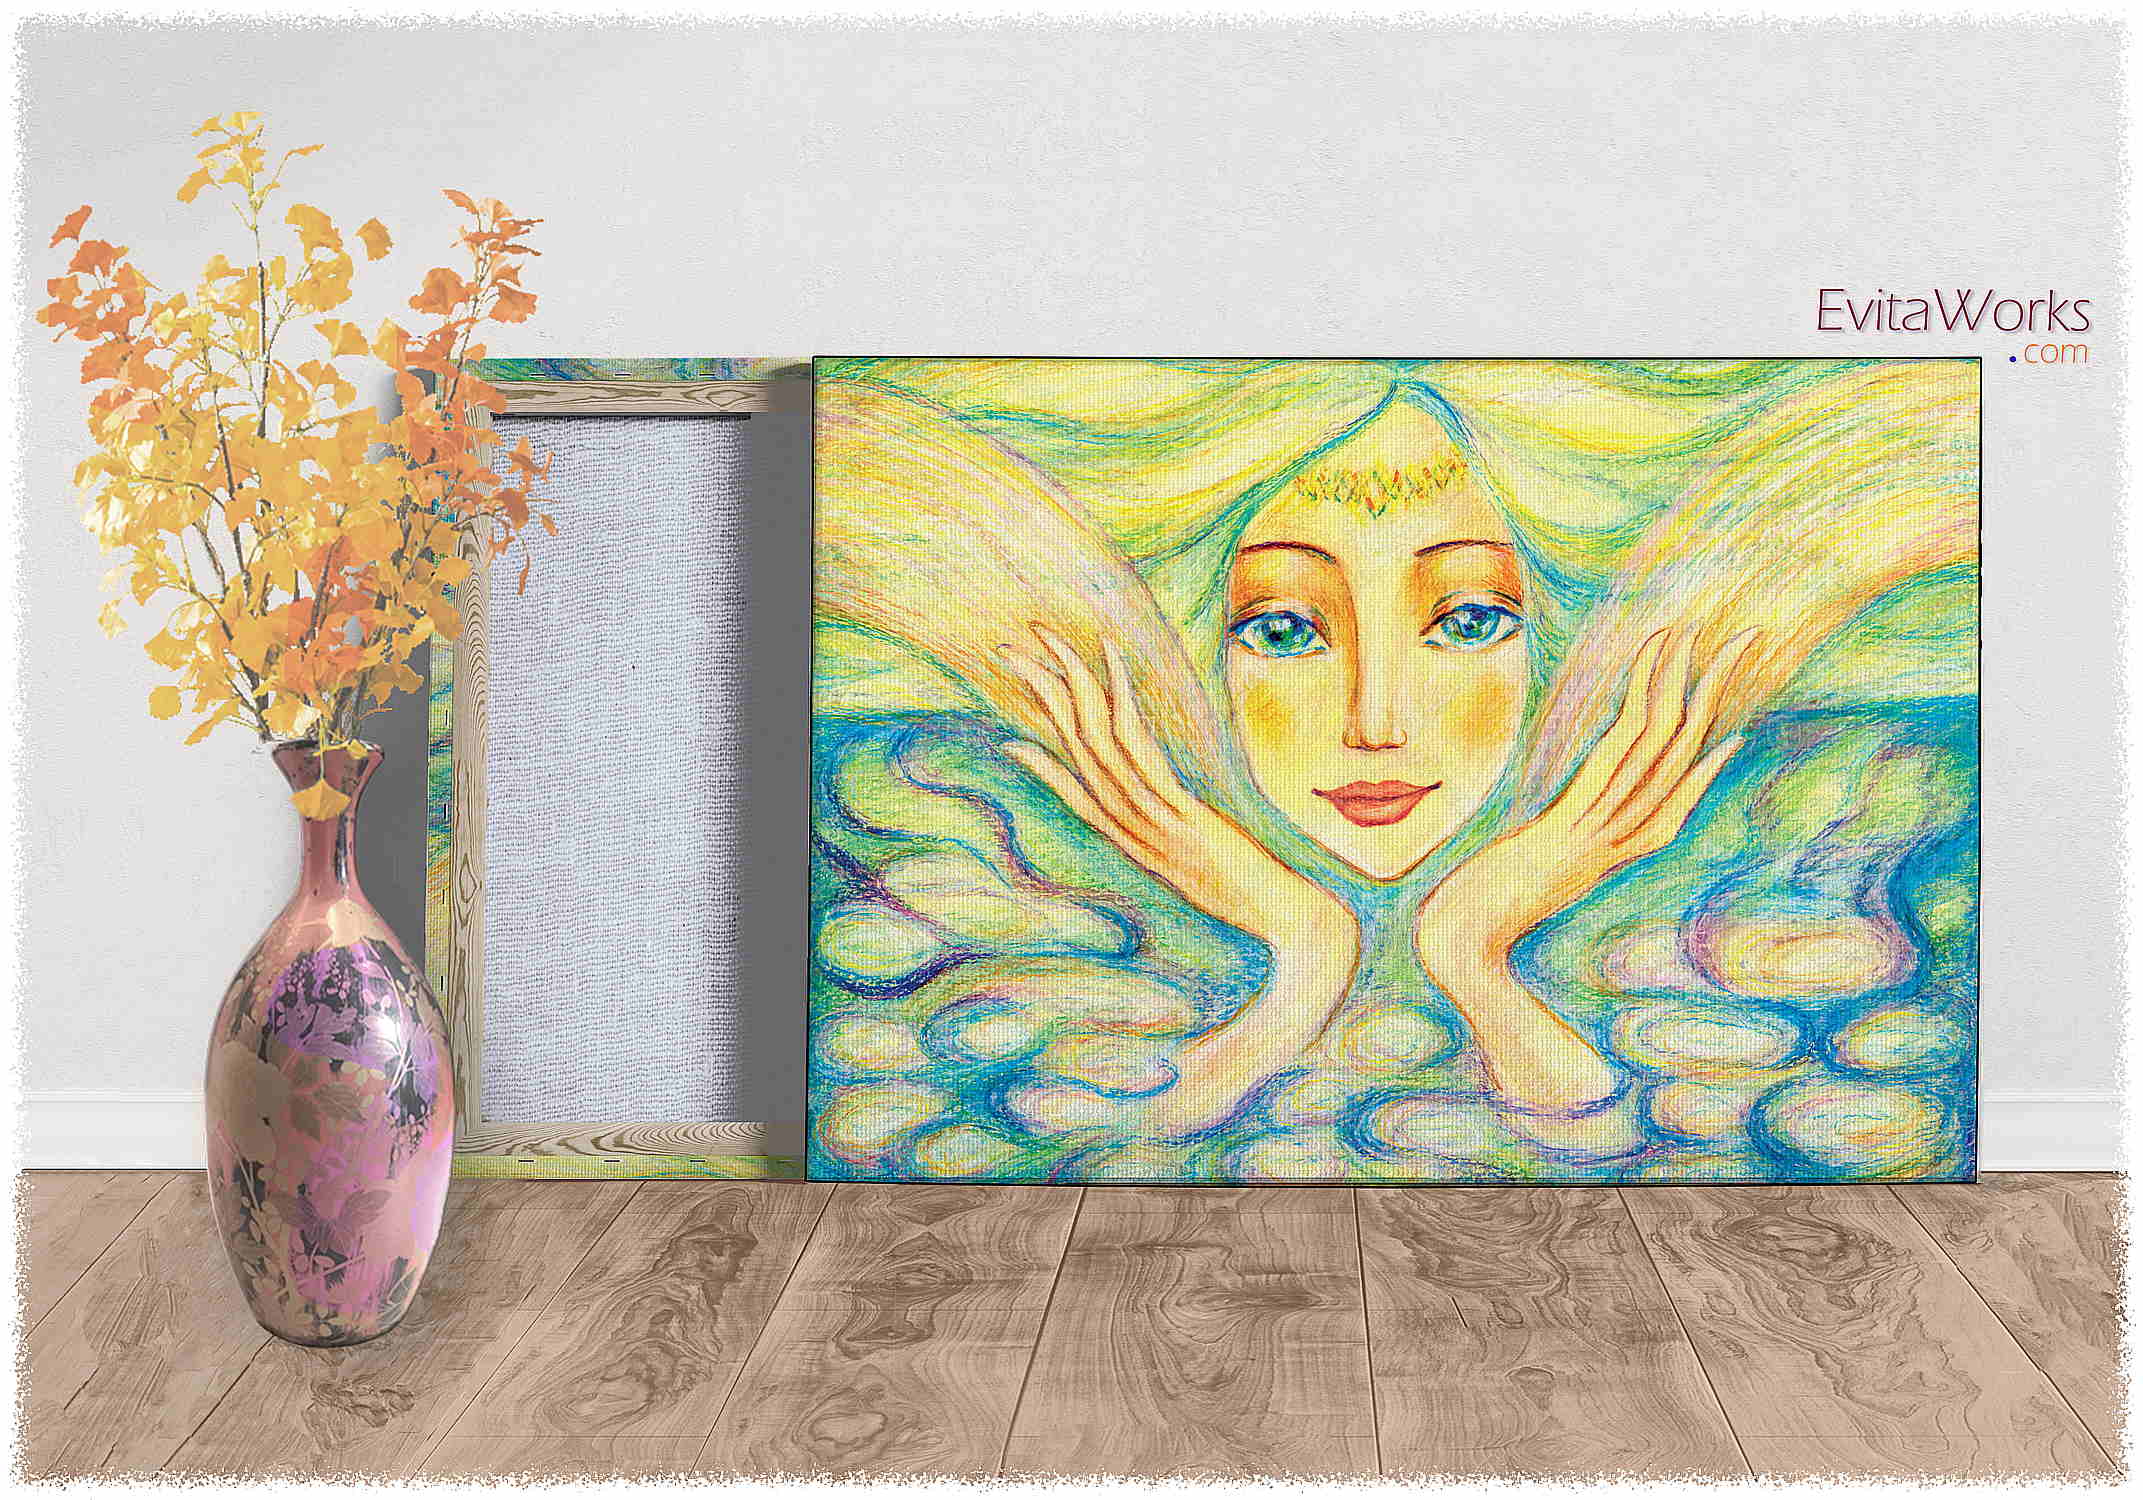 Hit to learn about "Angel of Serenity, beautiful female creature" on canvases